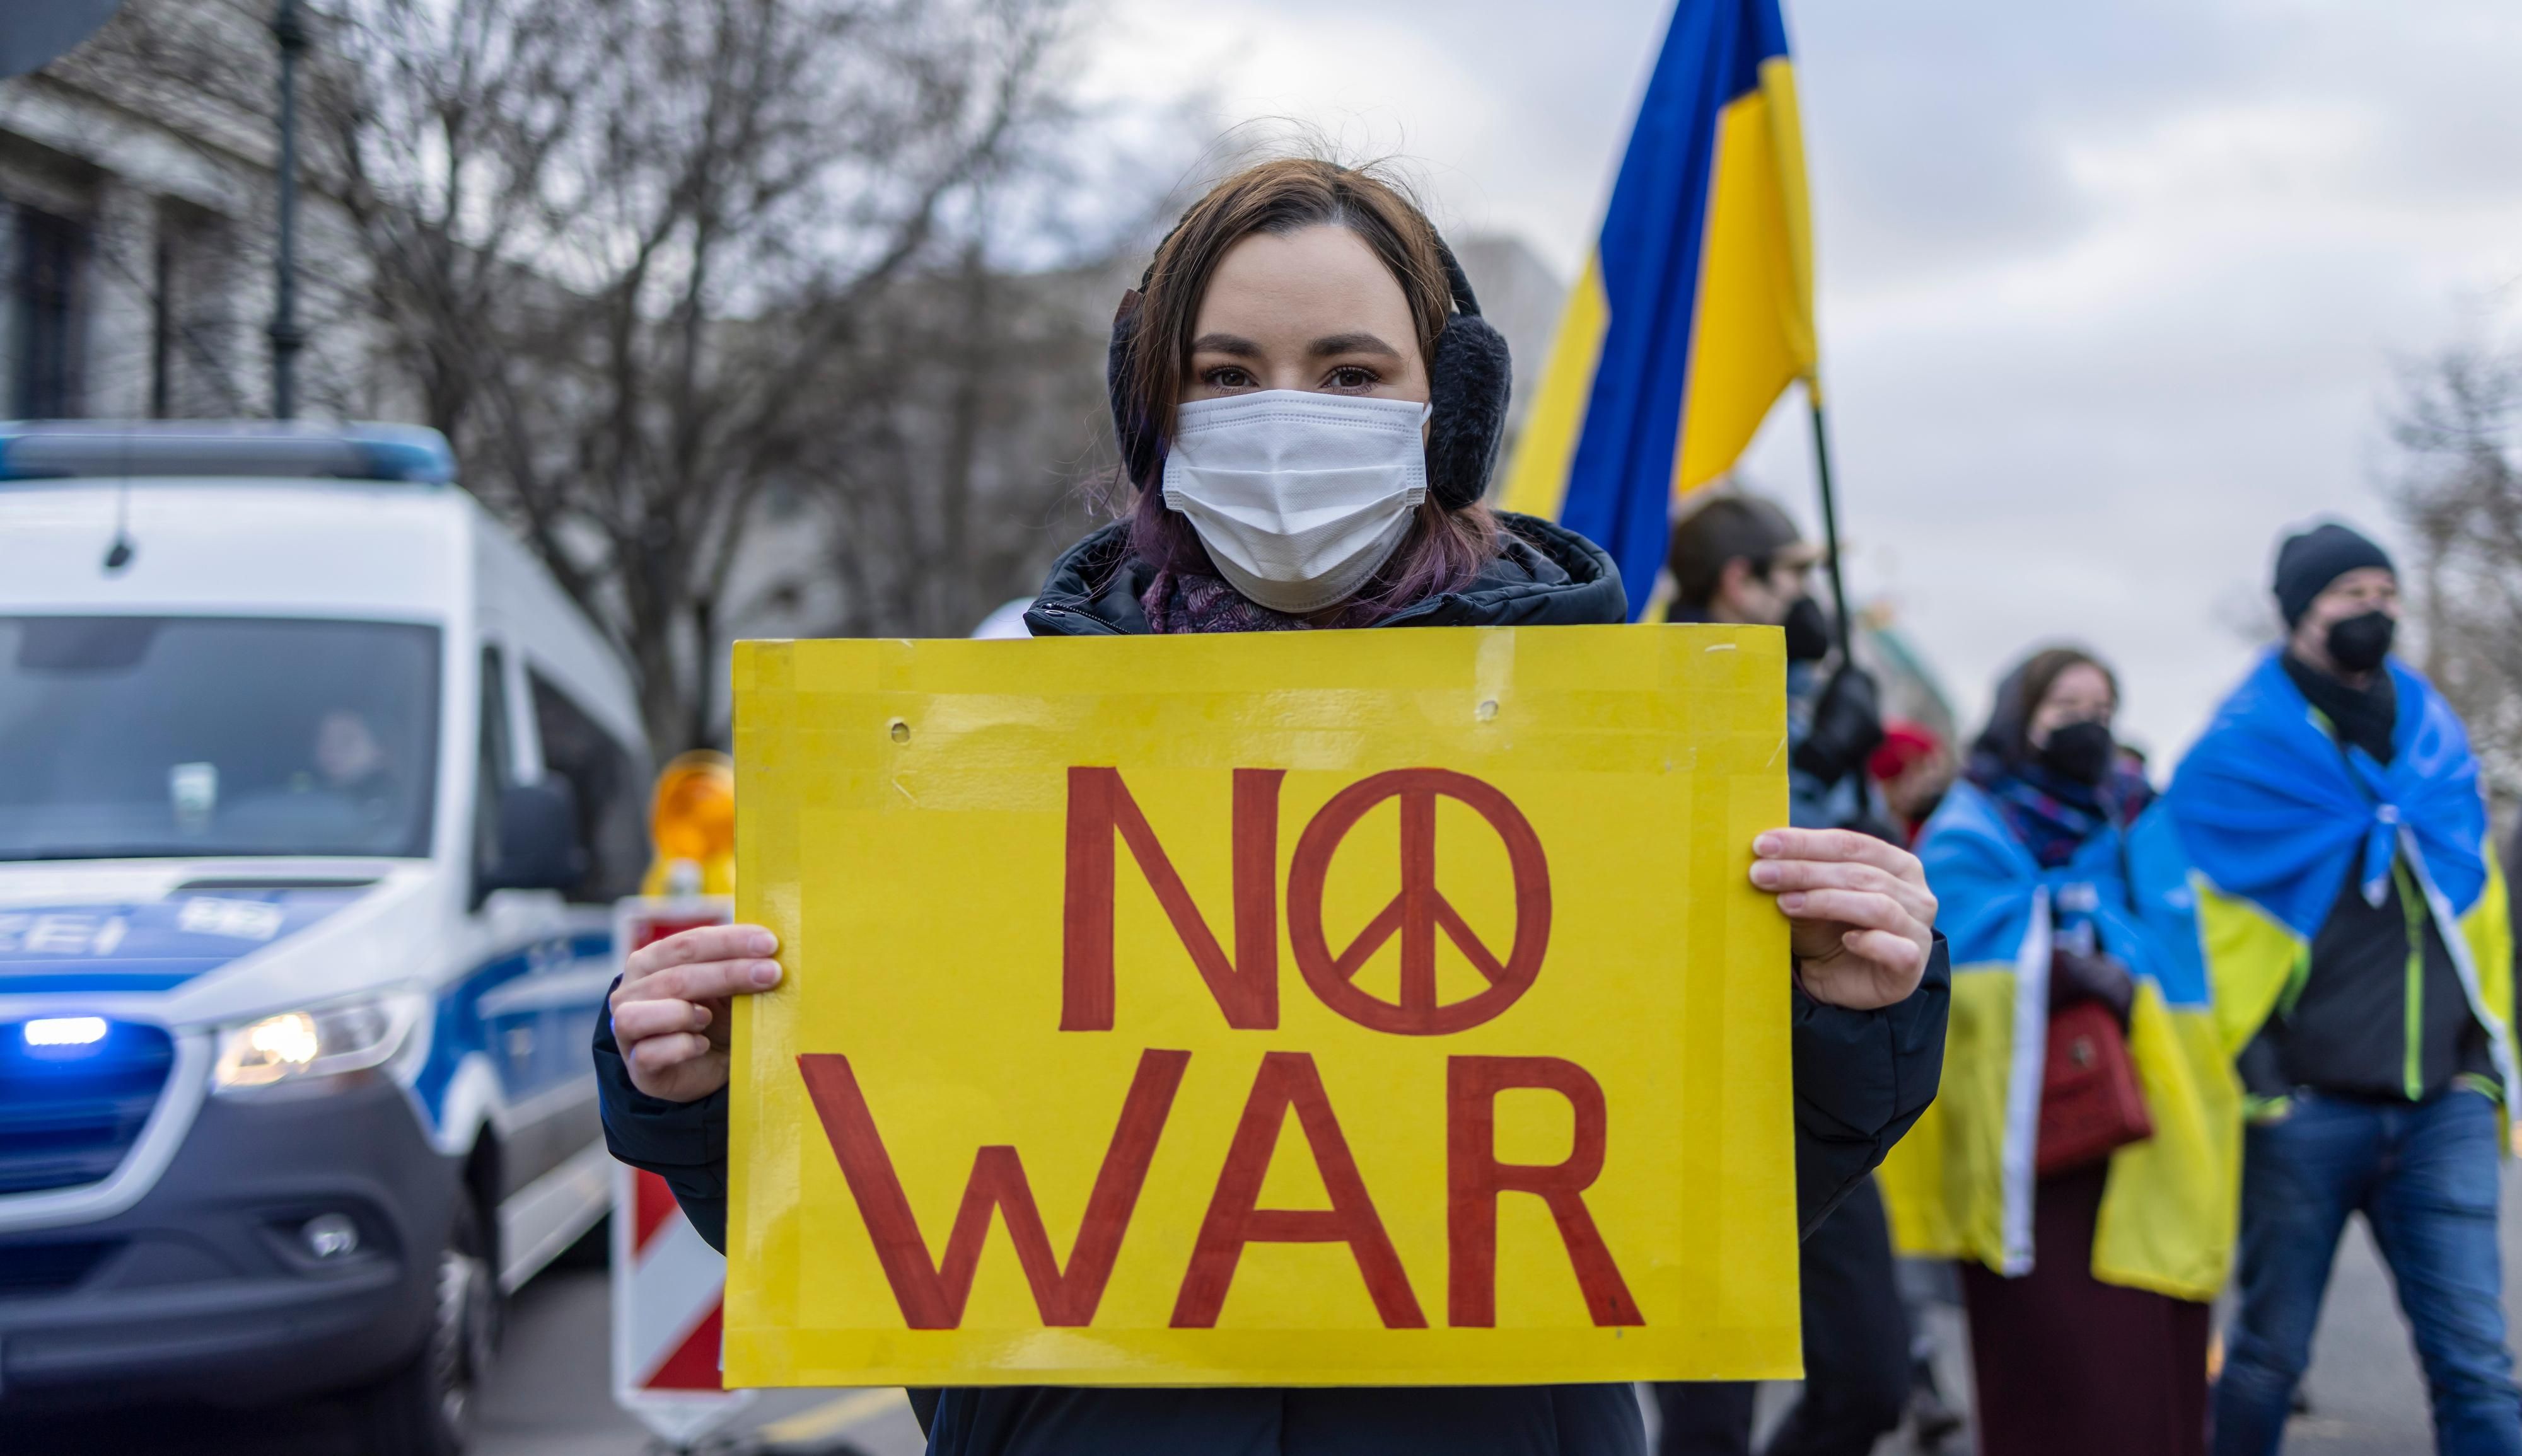 Protester with a sign that says "No War" outside the Russian embassy in Berlin, Germany